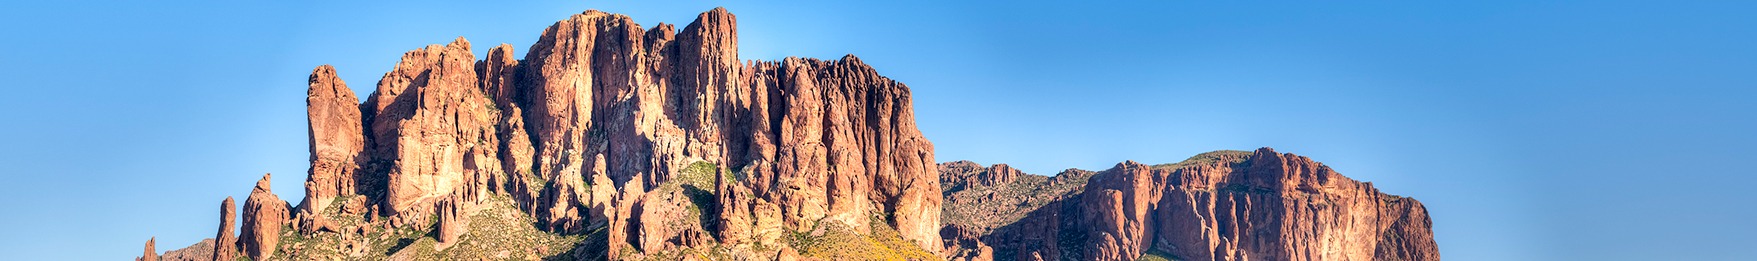 Mountain range in Arizona, a state where personal injury attorney Super Woman Super Lawyer can help